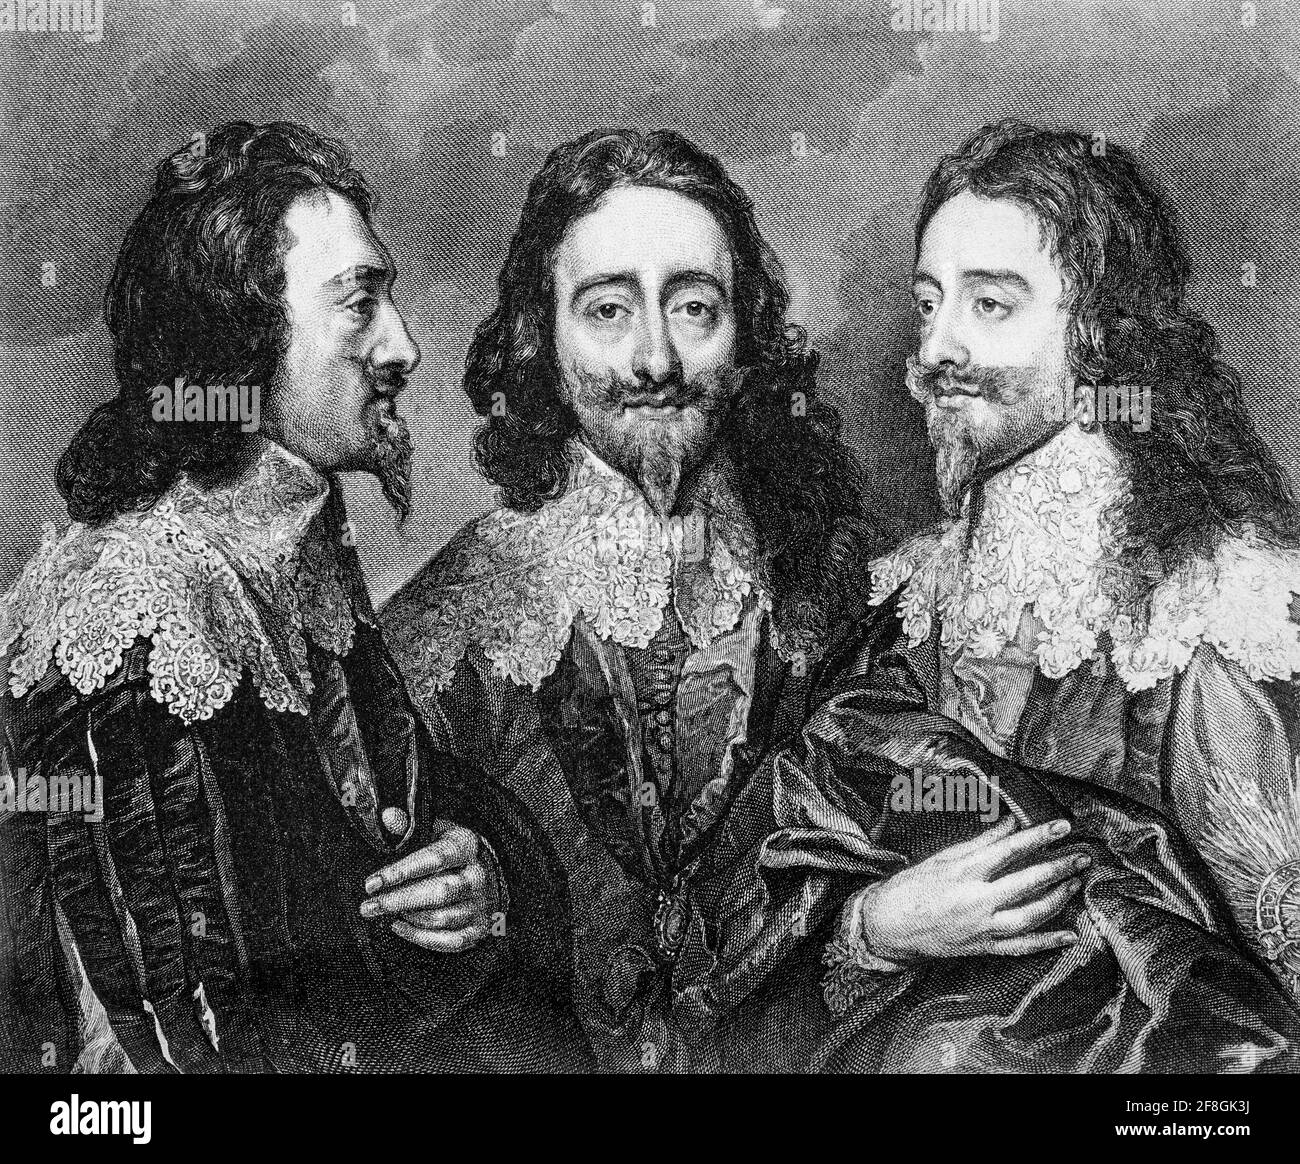 A triple portrait of Charles I (1600-1649). Born into the House of Stuart, he was king of England, Scotland, and Ireland from 27 March 1625 until his execution in 1649. Painting by Sir Anthony van Dyck (1599-1641), a Flemish Baroque artist who became the leading court painter in England. Stock Photo